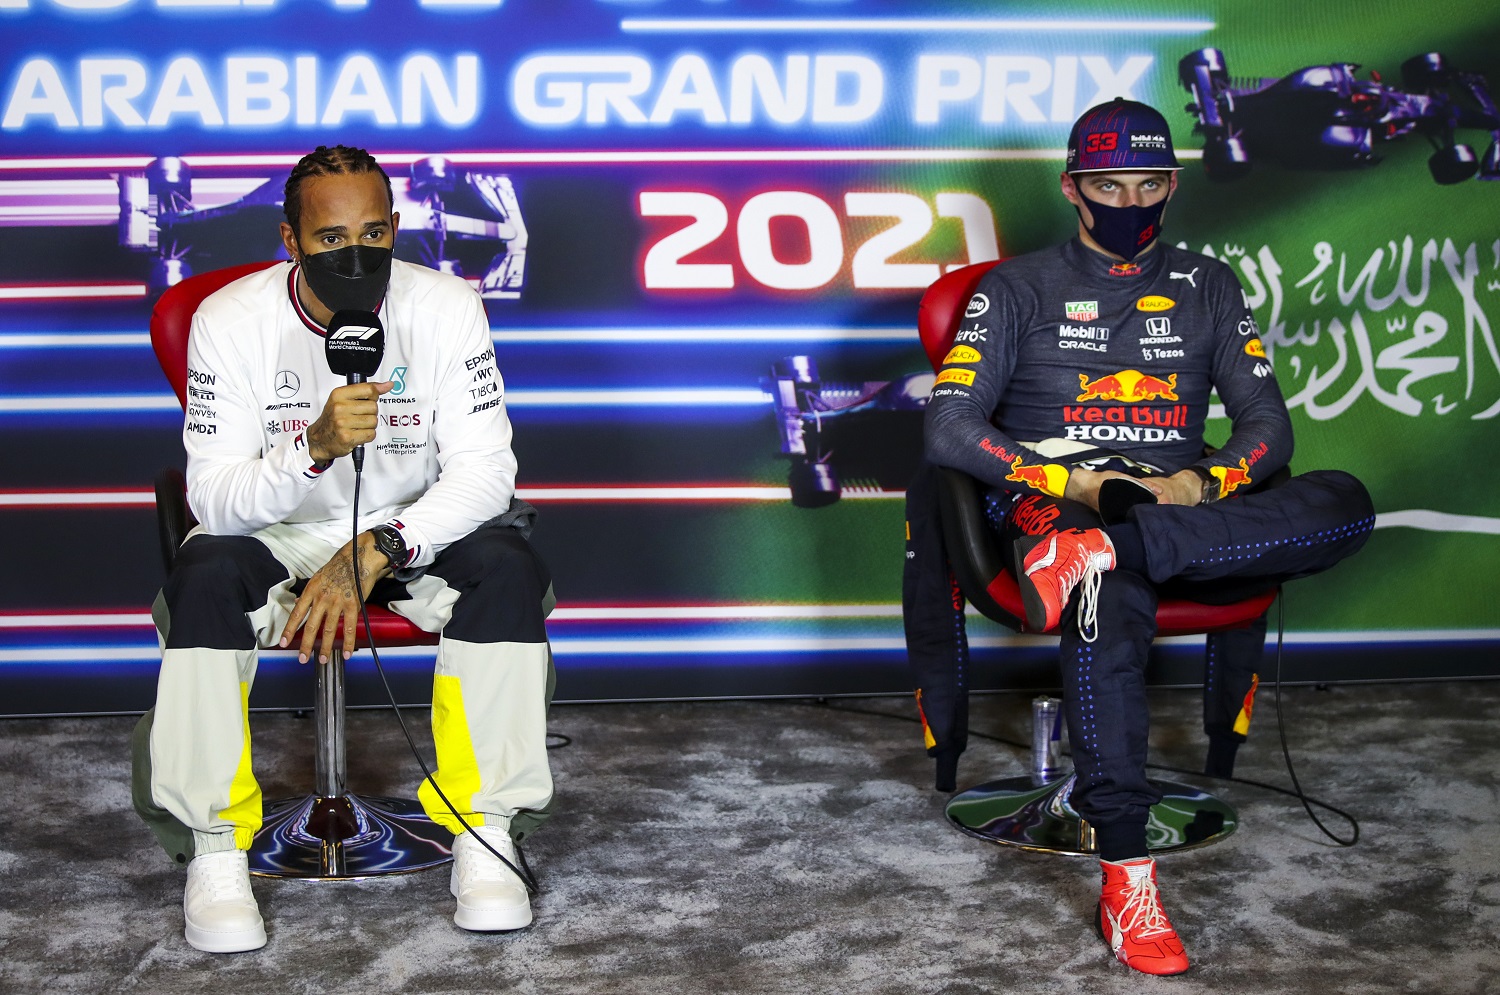 Lewis Hamilton of Mercedes GP and Max Verstappen of Red Bull Racing talk in the press conference after qualifying for the Formula 1 Grand Prix of Saudi Arabia at Jeddah Corniche Circuit. | Florent Gooden - Pool/Getty Images